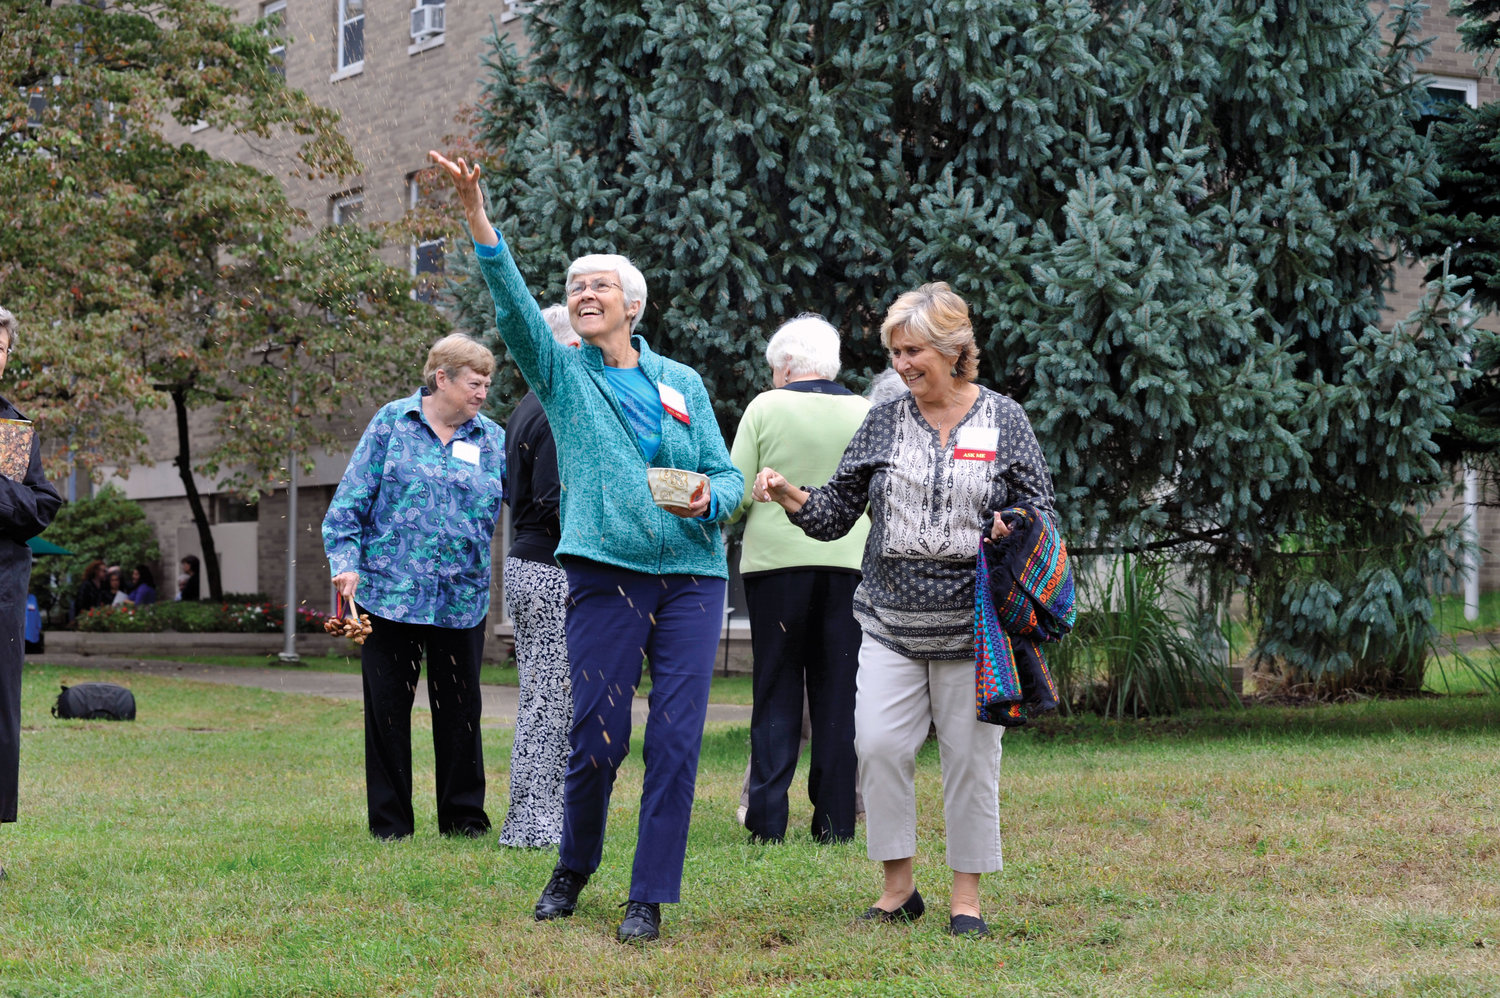 Sister Bette Ann Jaster, O.P., tosses seeds into the air at Mariandale following a Sept. 28 press conference in which the Dominican Sisters of Hope announced a conservation easement to prevent future development of 34 of the 61 acres on their Ossining property.